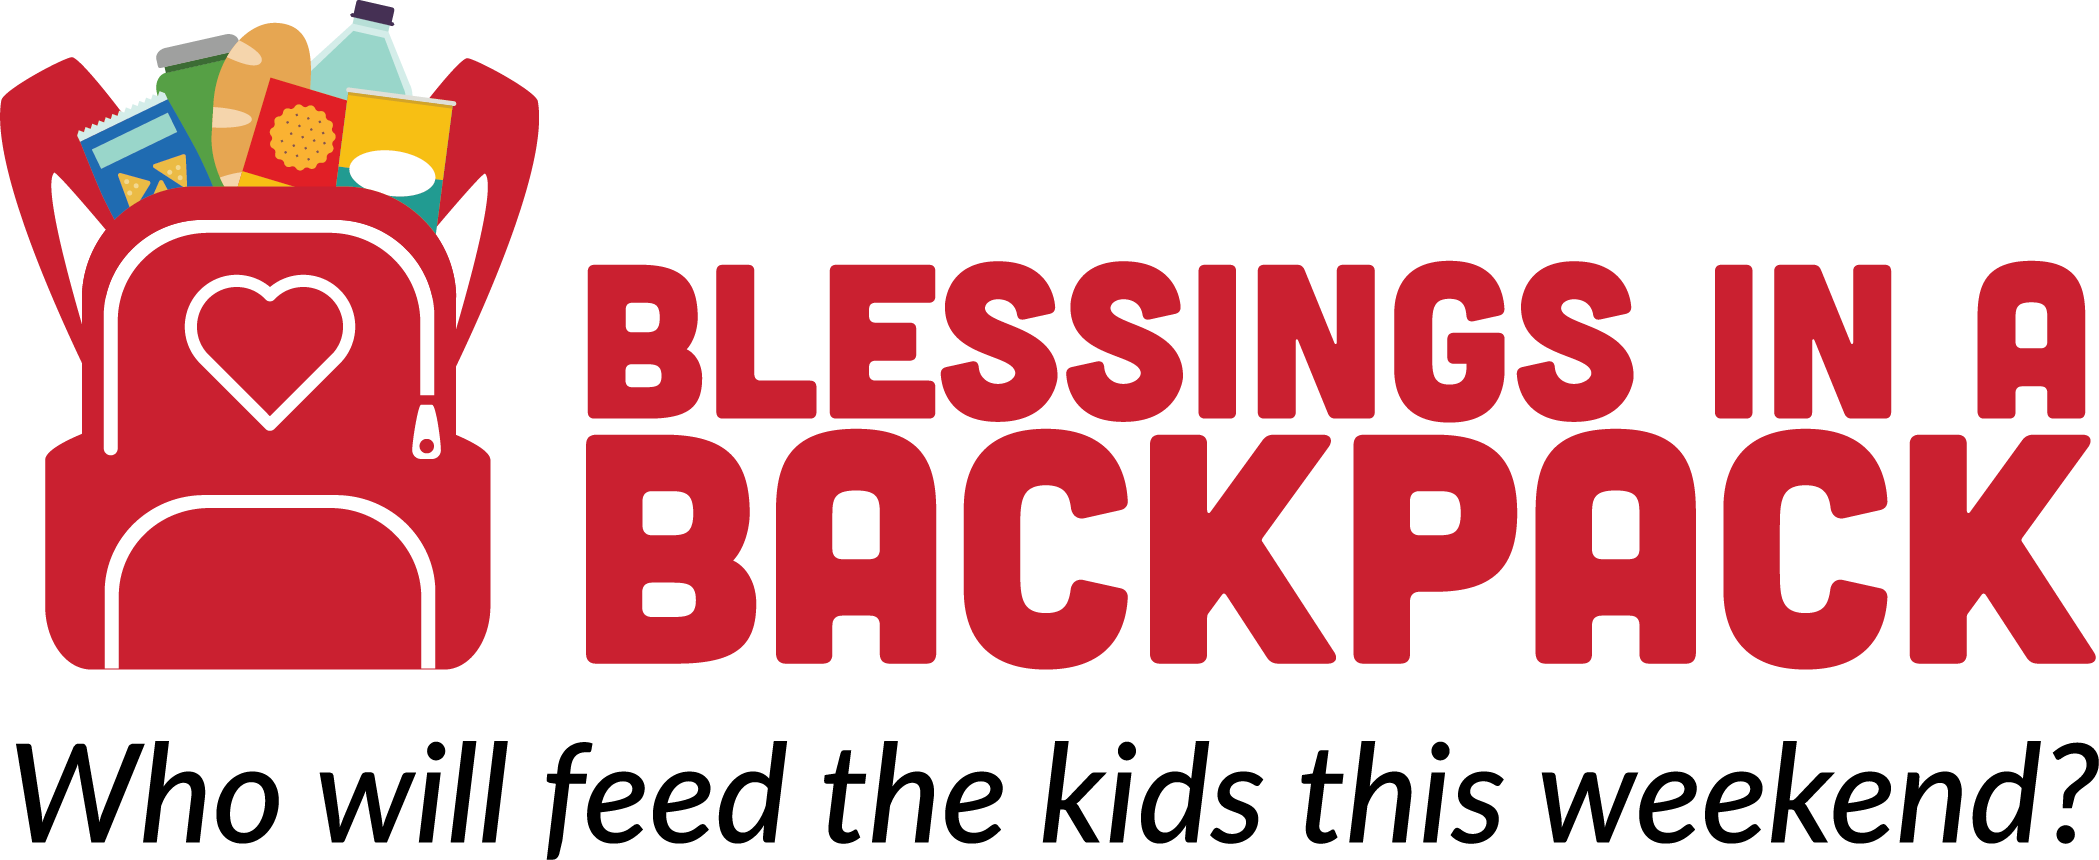 Blessings in a Backpack Who Will Feed the Kids this Weekend?